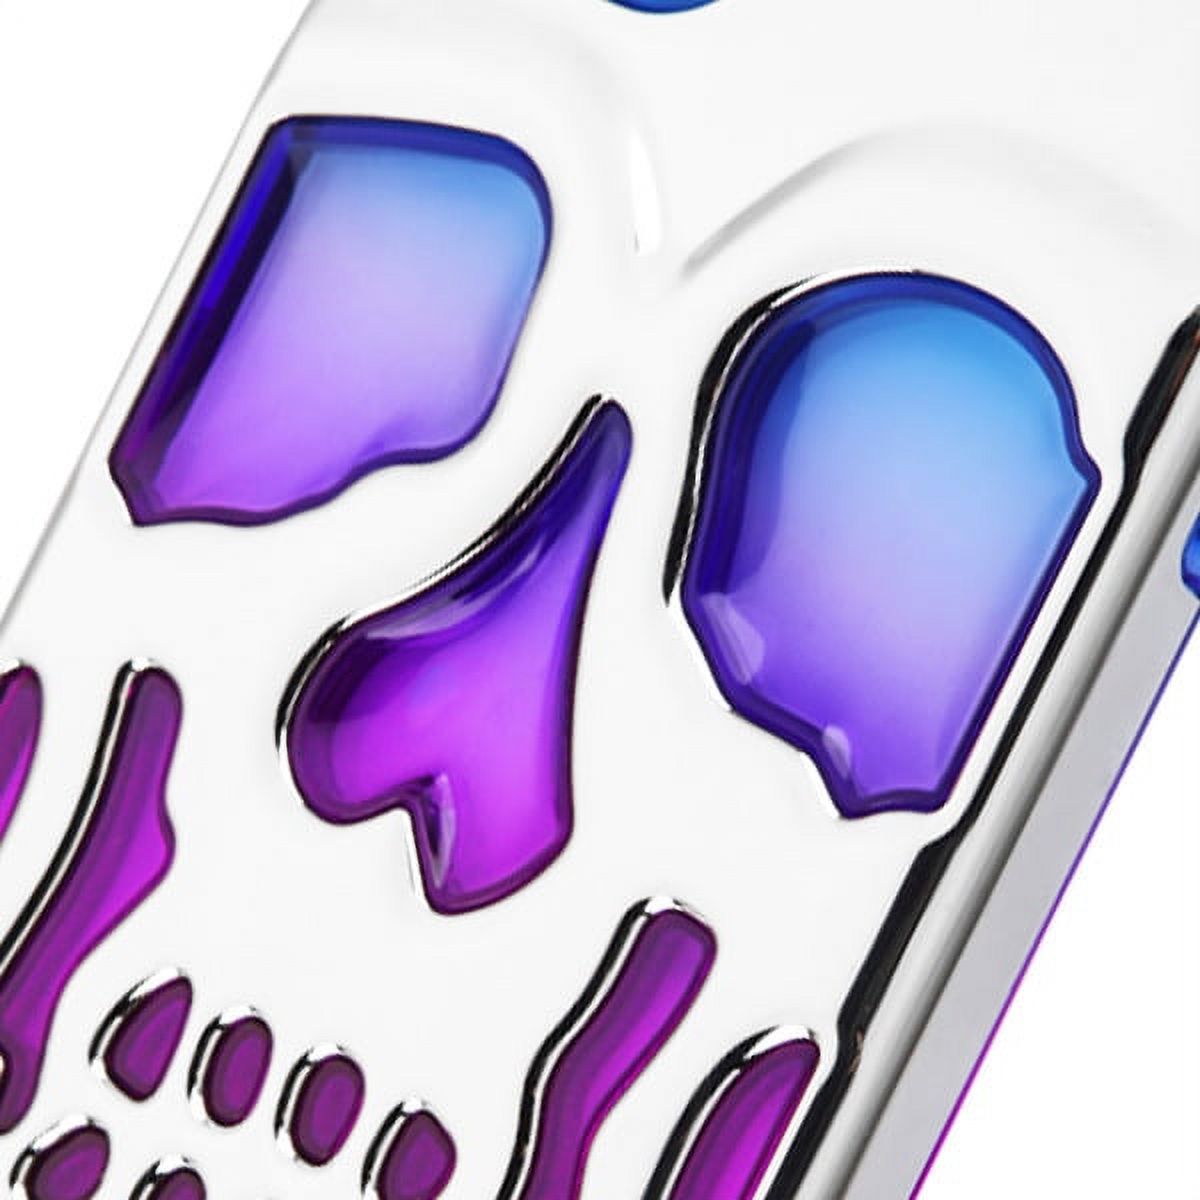 Apple iPhone 11 PRO Phone Case Tuff Hybrid Skeleton Shockproof Armor Impact Rubber Dual Layer Hard Soft TPU Rugged Protective Cover SKULL Blue Purple Silver Plating Phone Cover for Apple iPhone 11 Pro - image 4 of 5